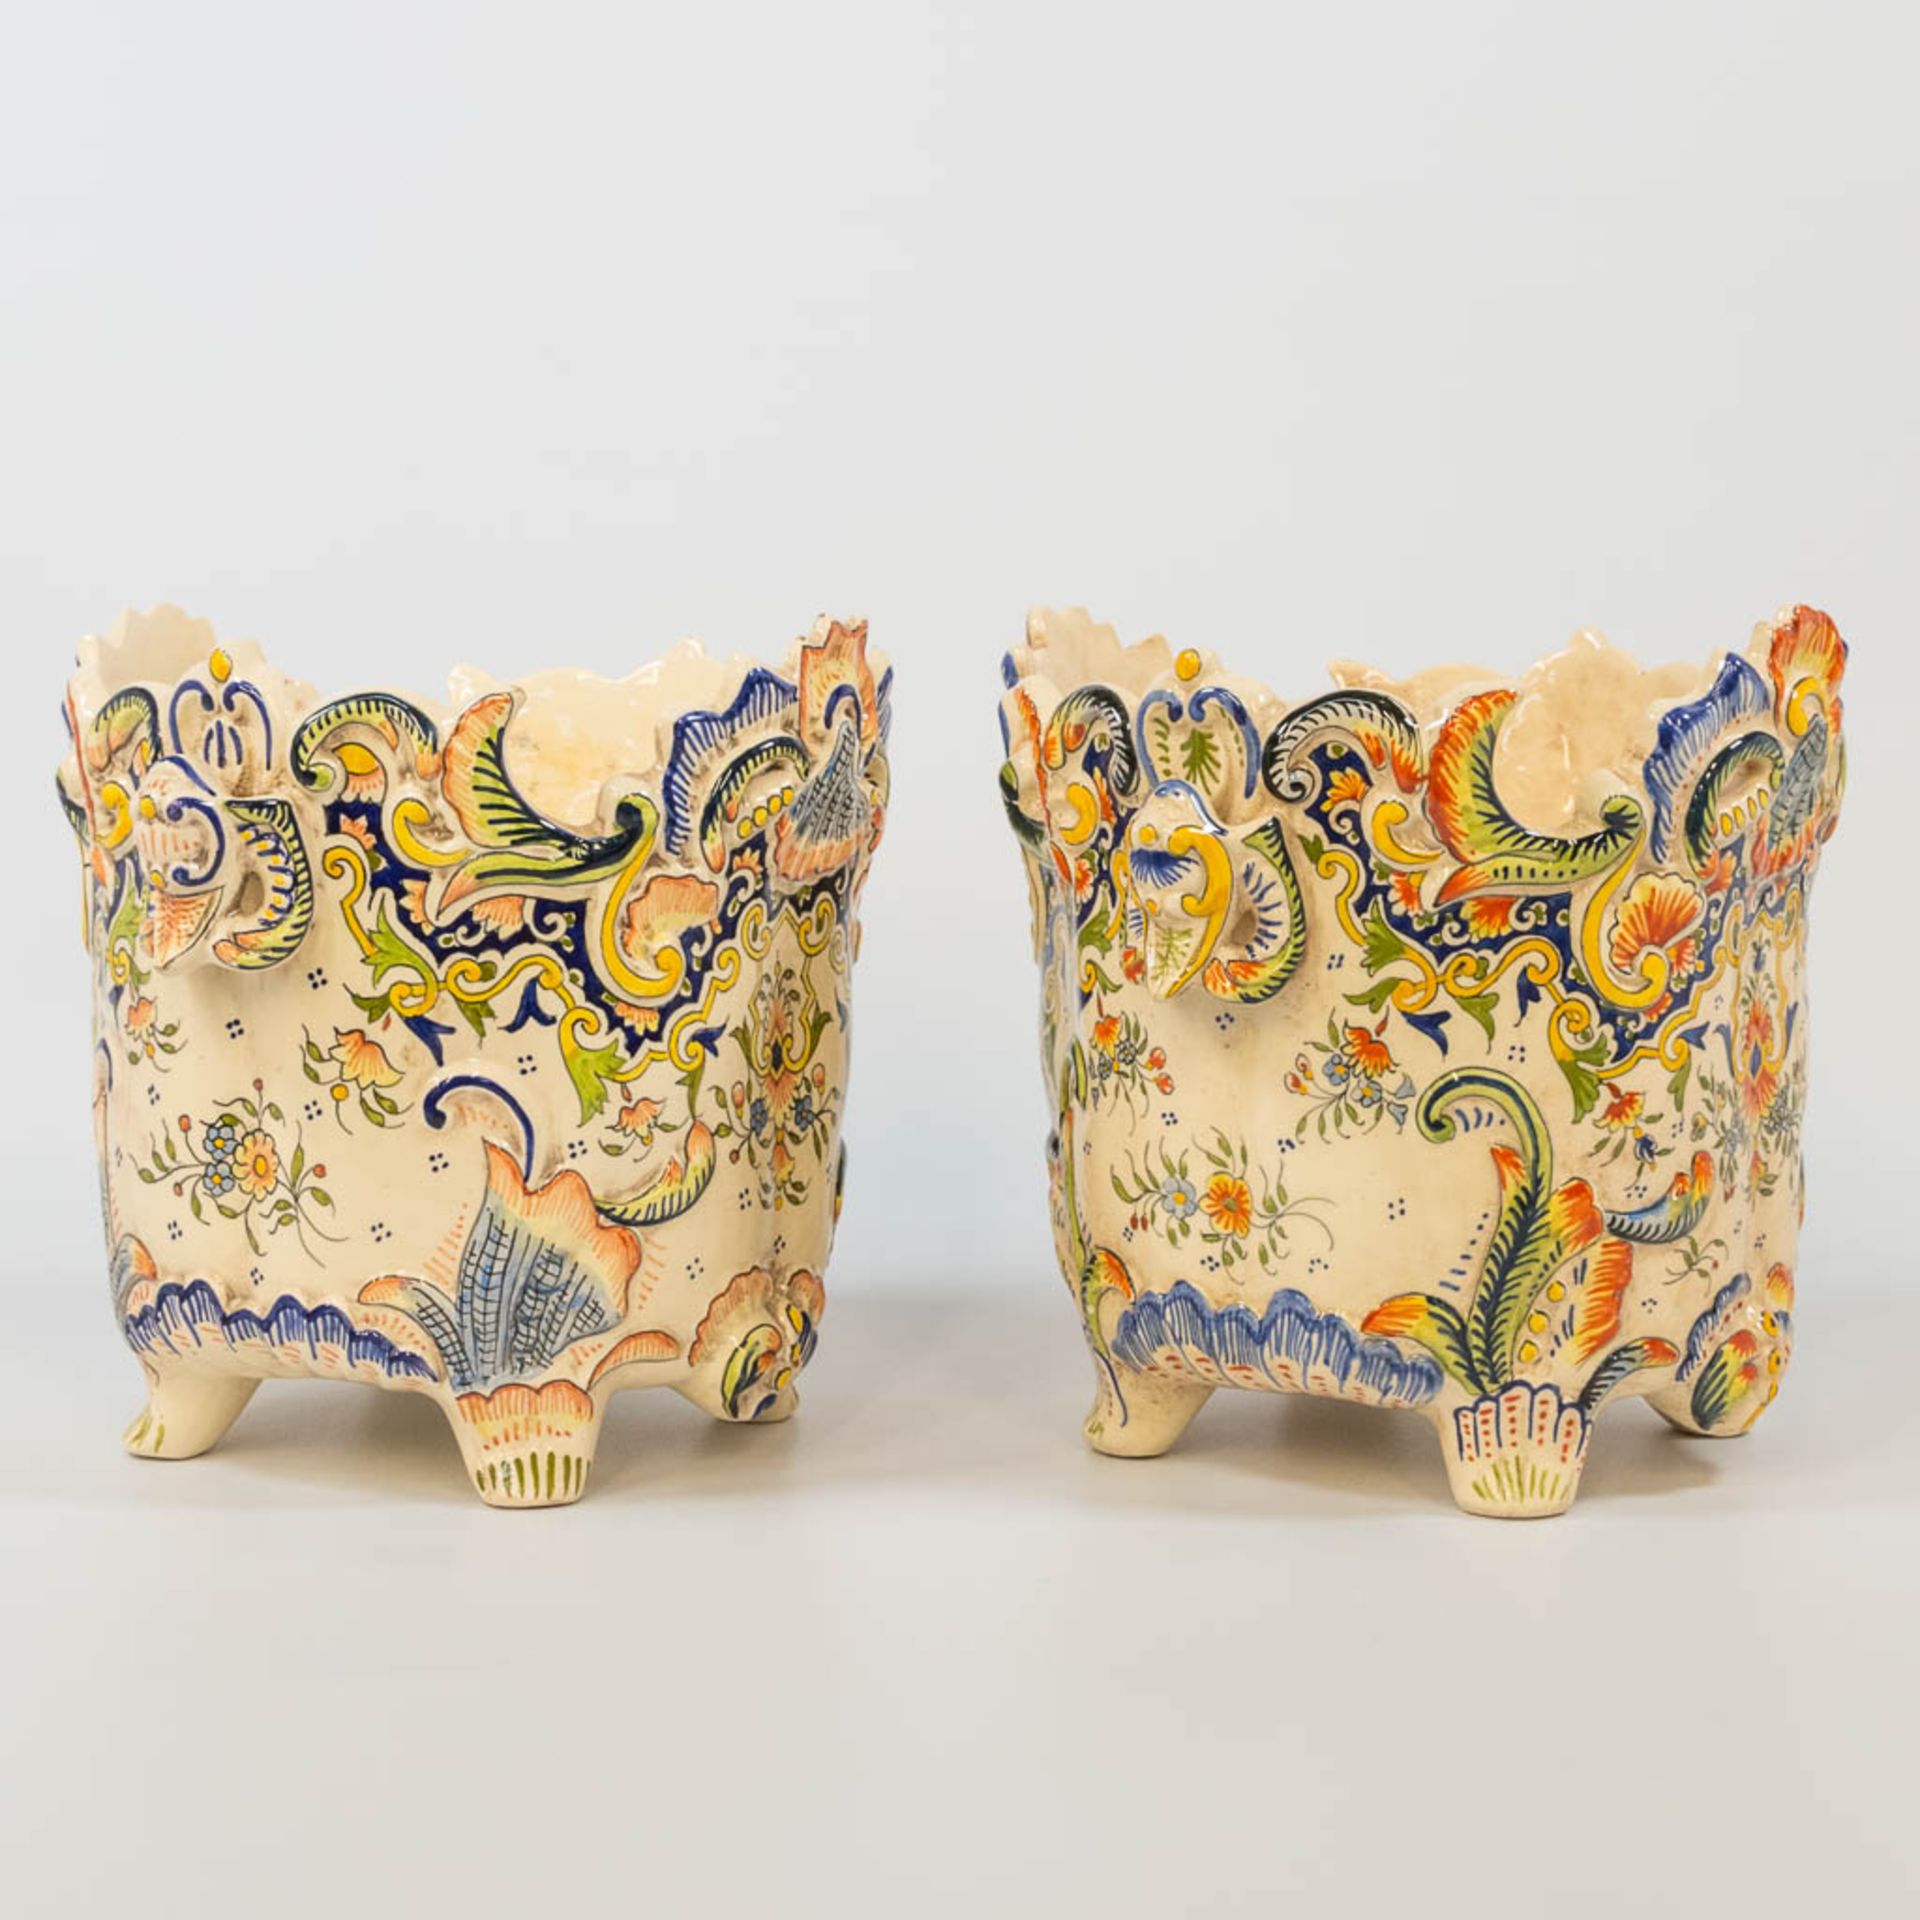 A pair of cache-pots with hand-painted decor, made of faience in Rouen, France. (23 x 27 x 22 cm) - Bild 12 aus 17